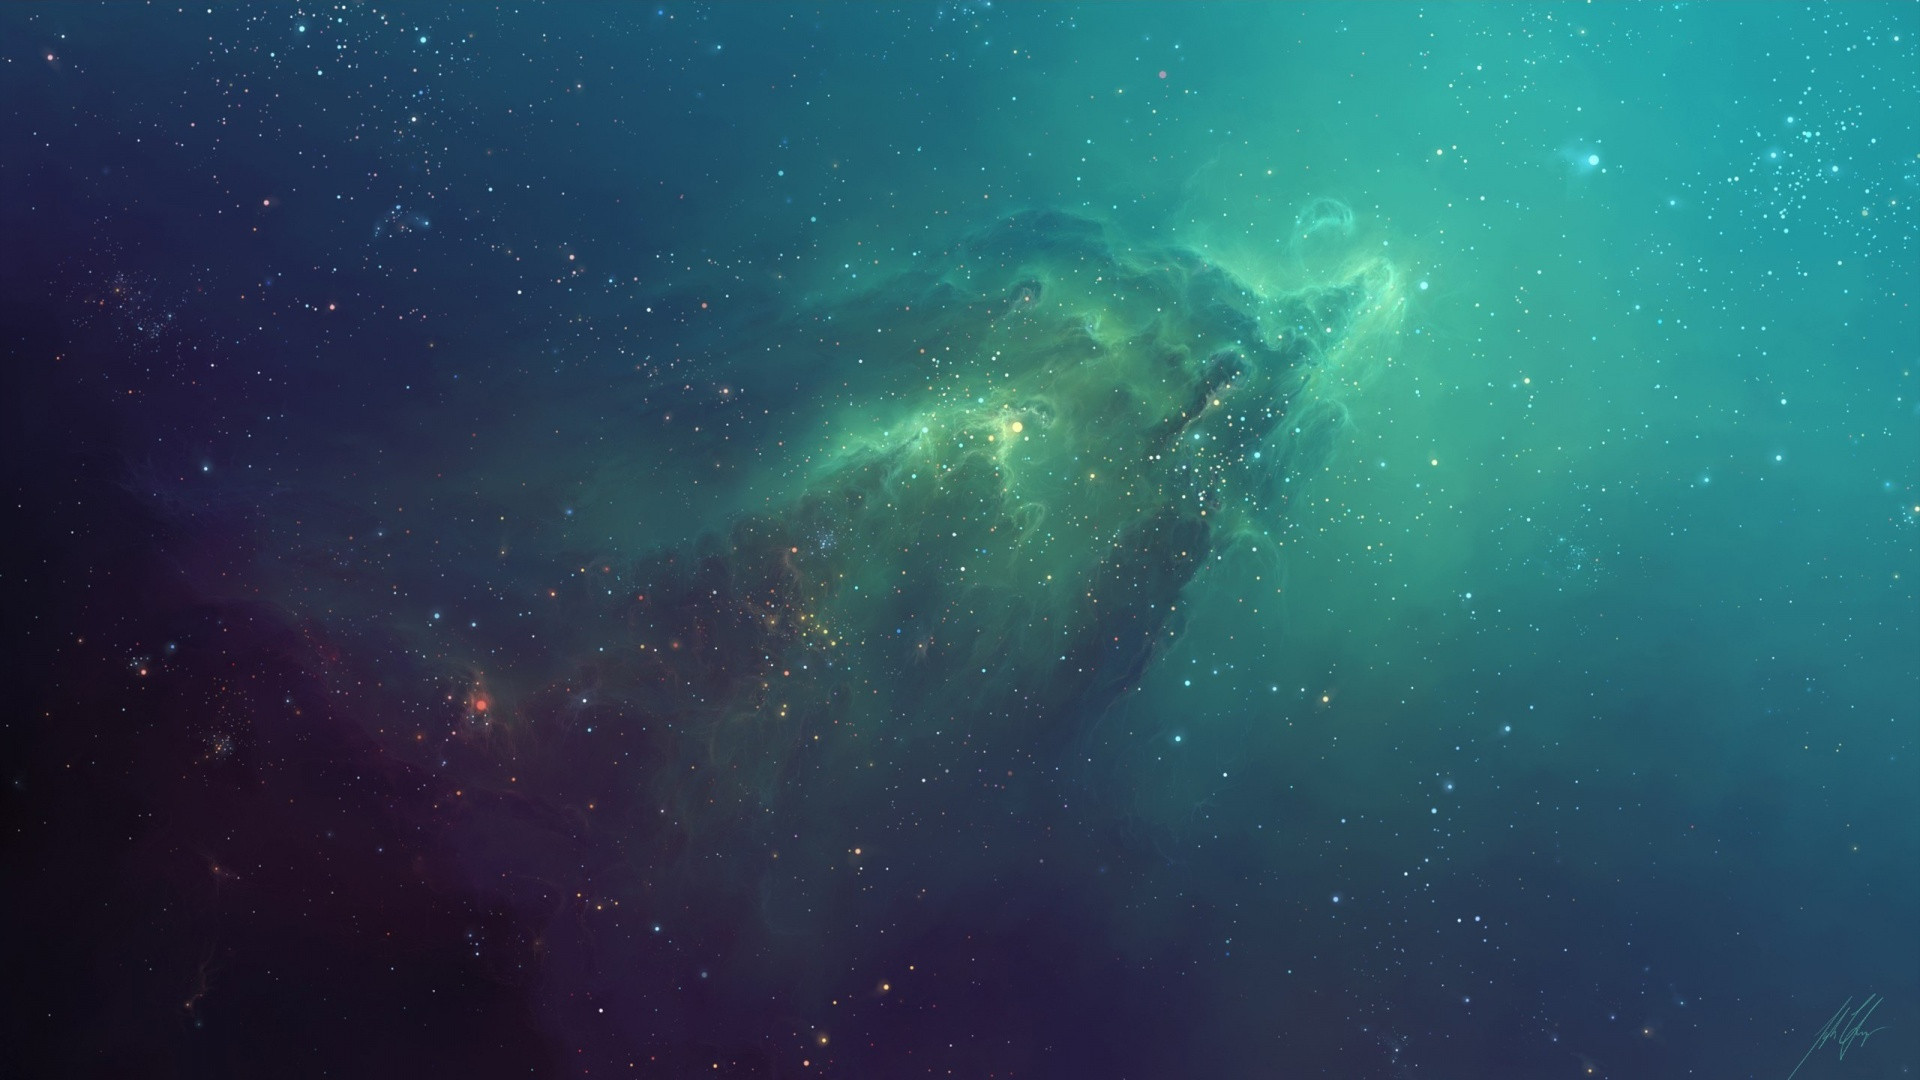 If you like nebula wallpapers similar to this, here is one Ive been using on my MBP 1920×1080